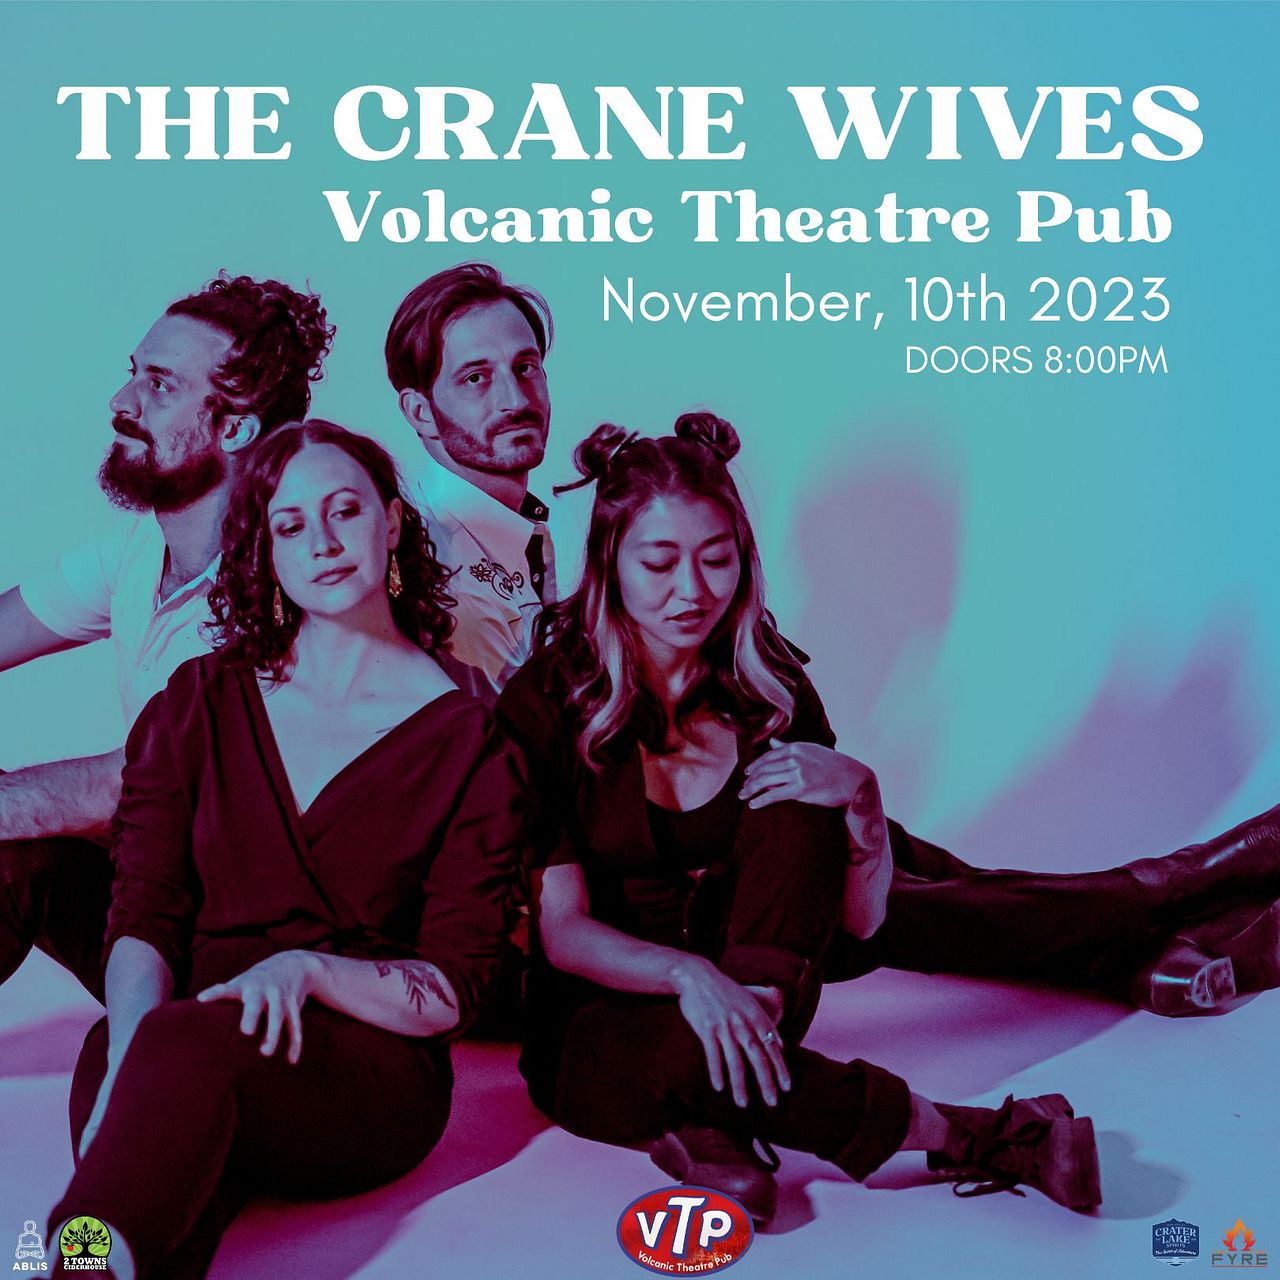 The Crane Wives And Tomi Tickets At Volcanic Theater Pub In Bend By Volcanic Theatre Pub Tixr